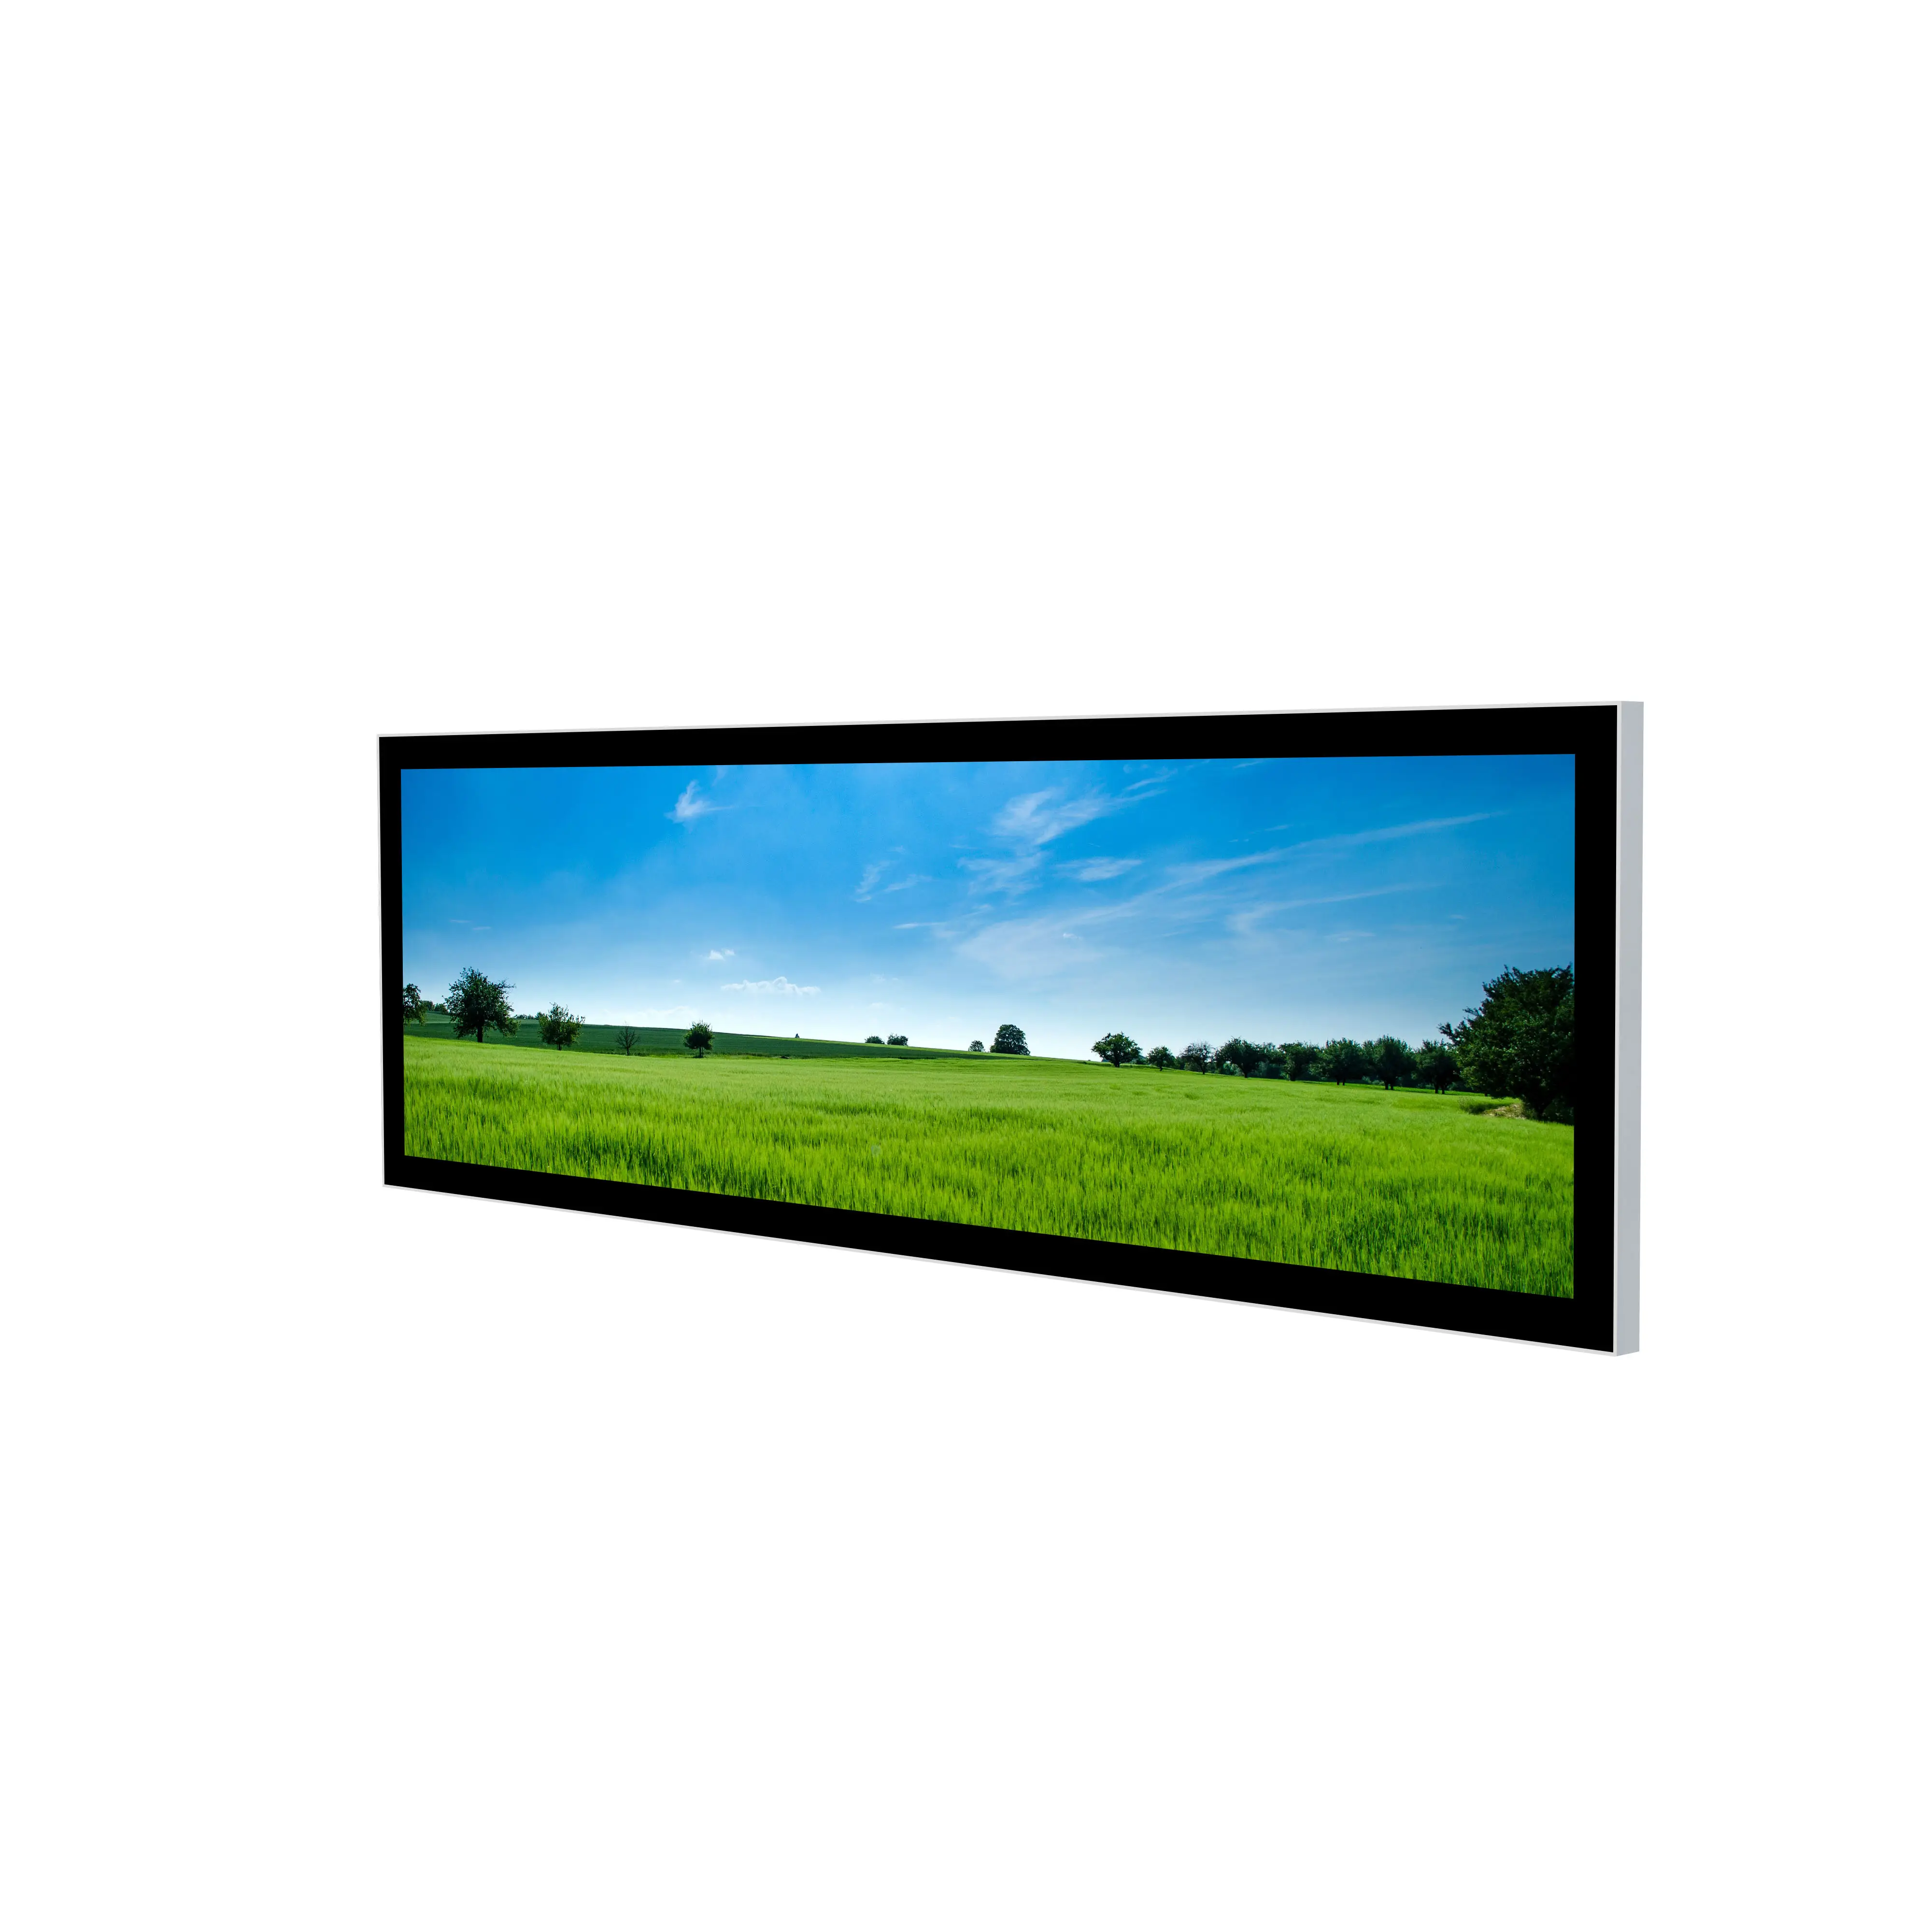 24 inch ultra wide stretched bar lcd monitor commercial screen advertising display support CMS software